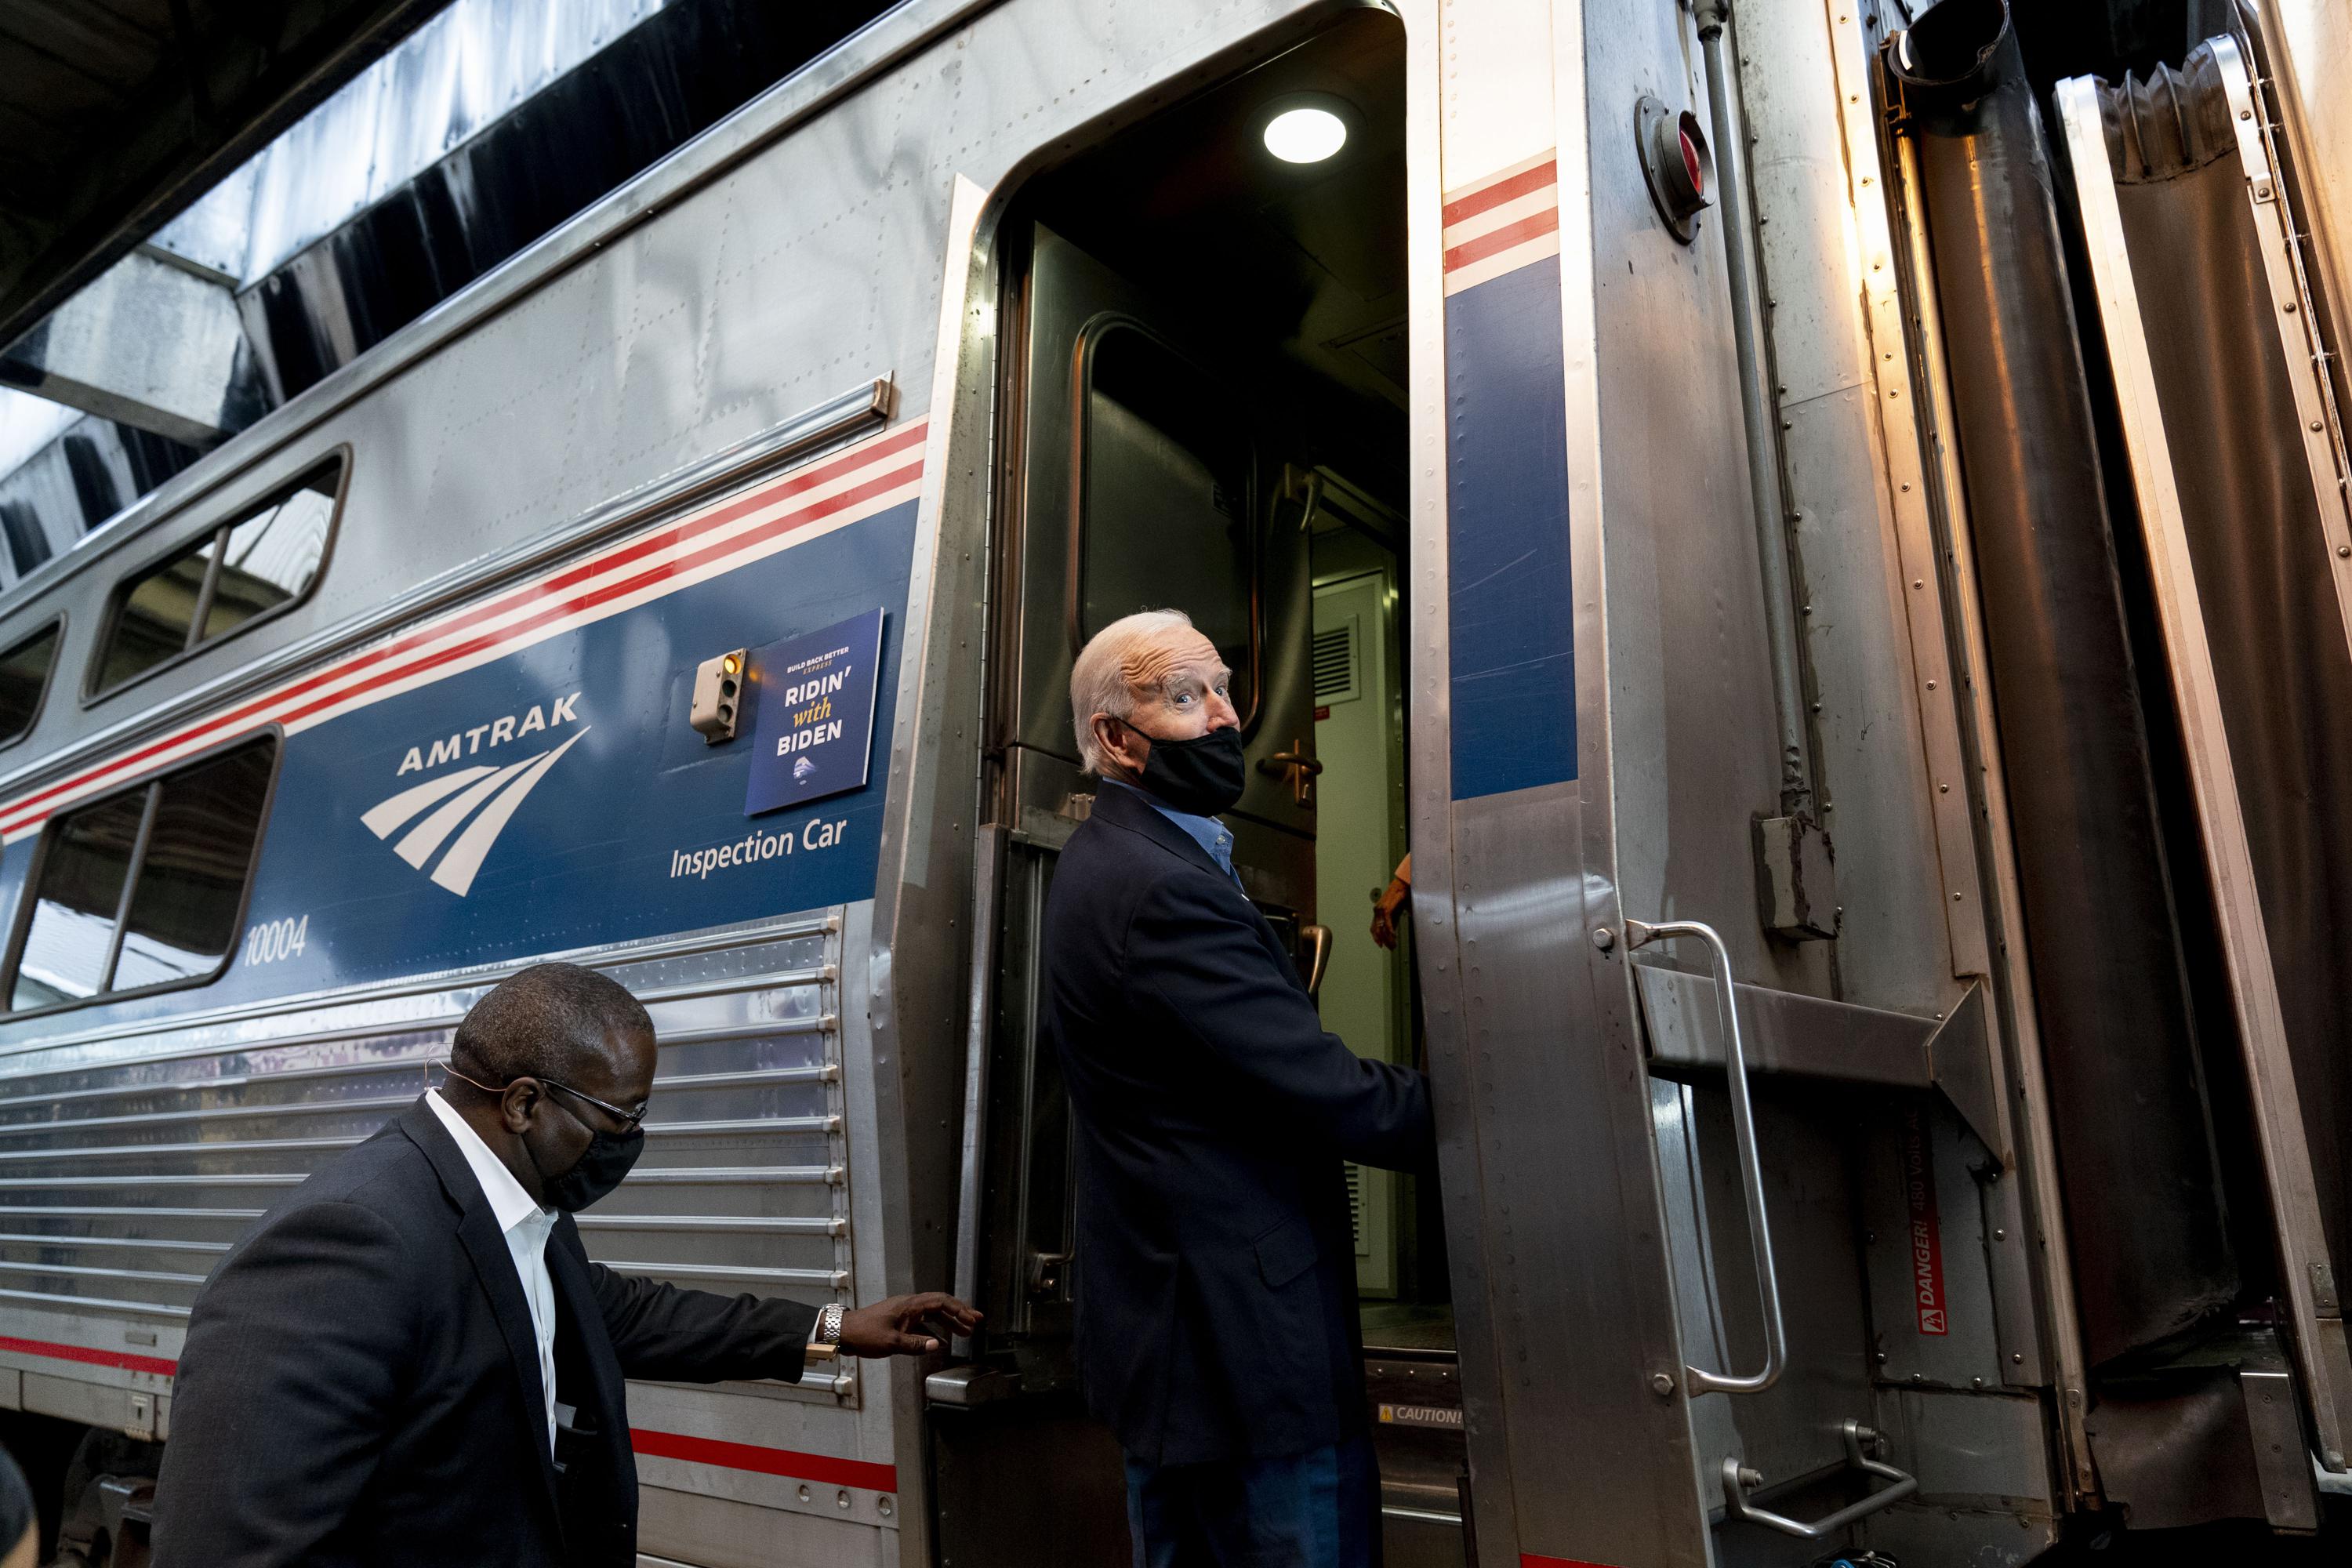 All aboard! Biden to help Amtrak mark 50 years on the rails - The Associated Press